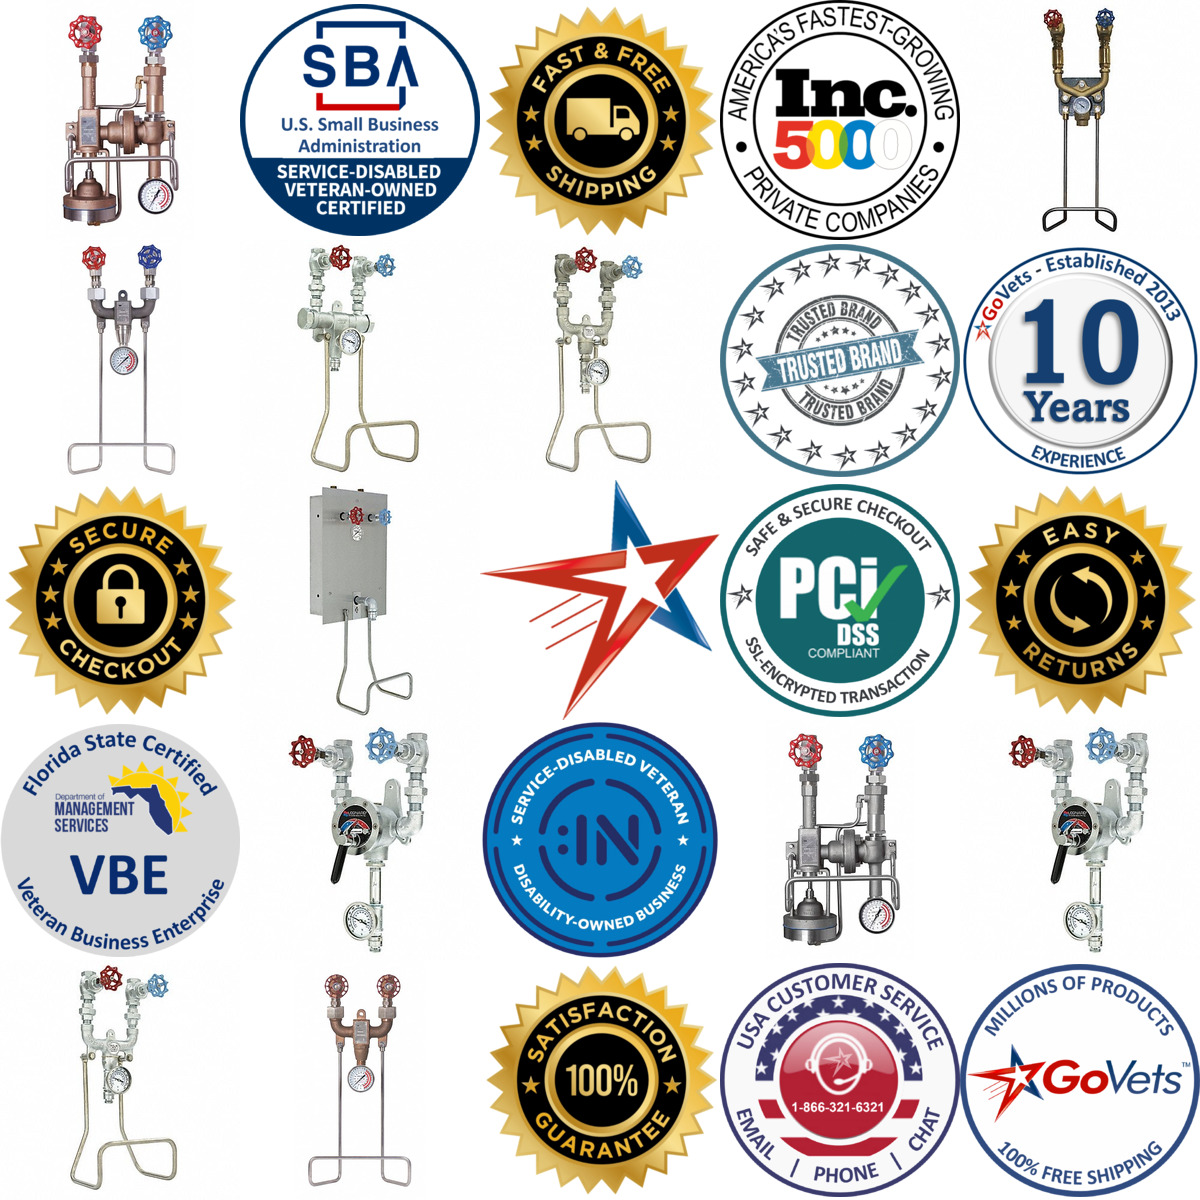 A selection of Hose Stations products on GoVets